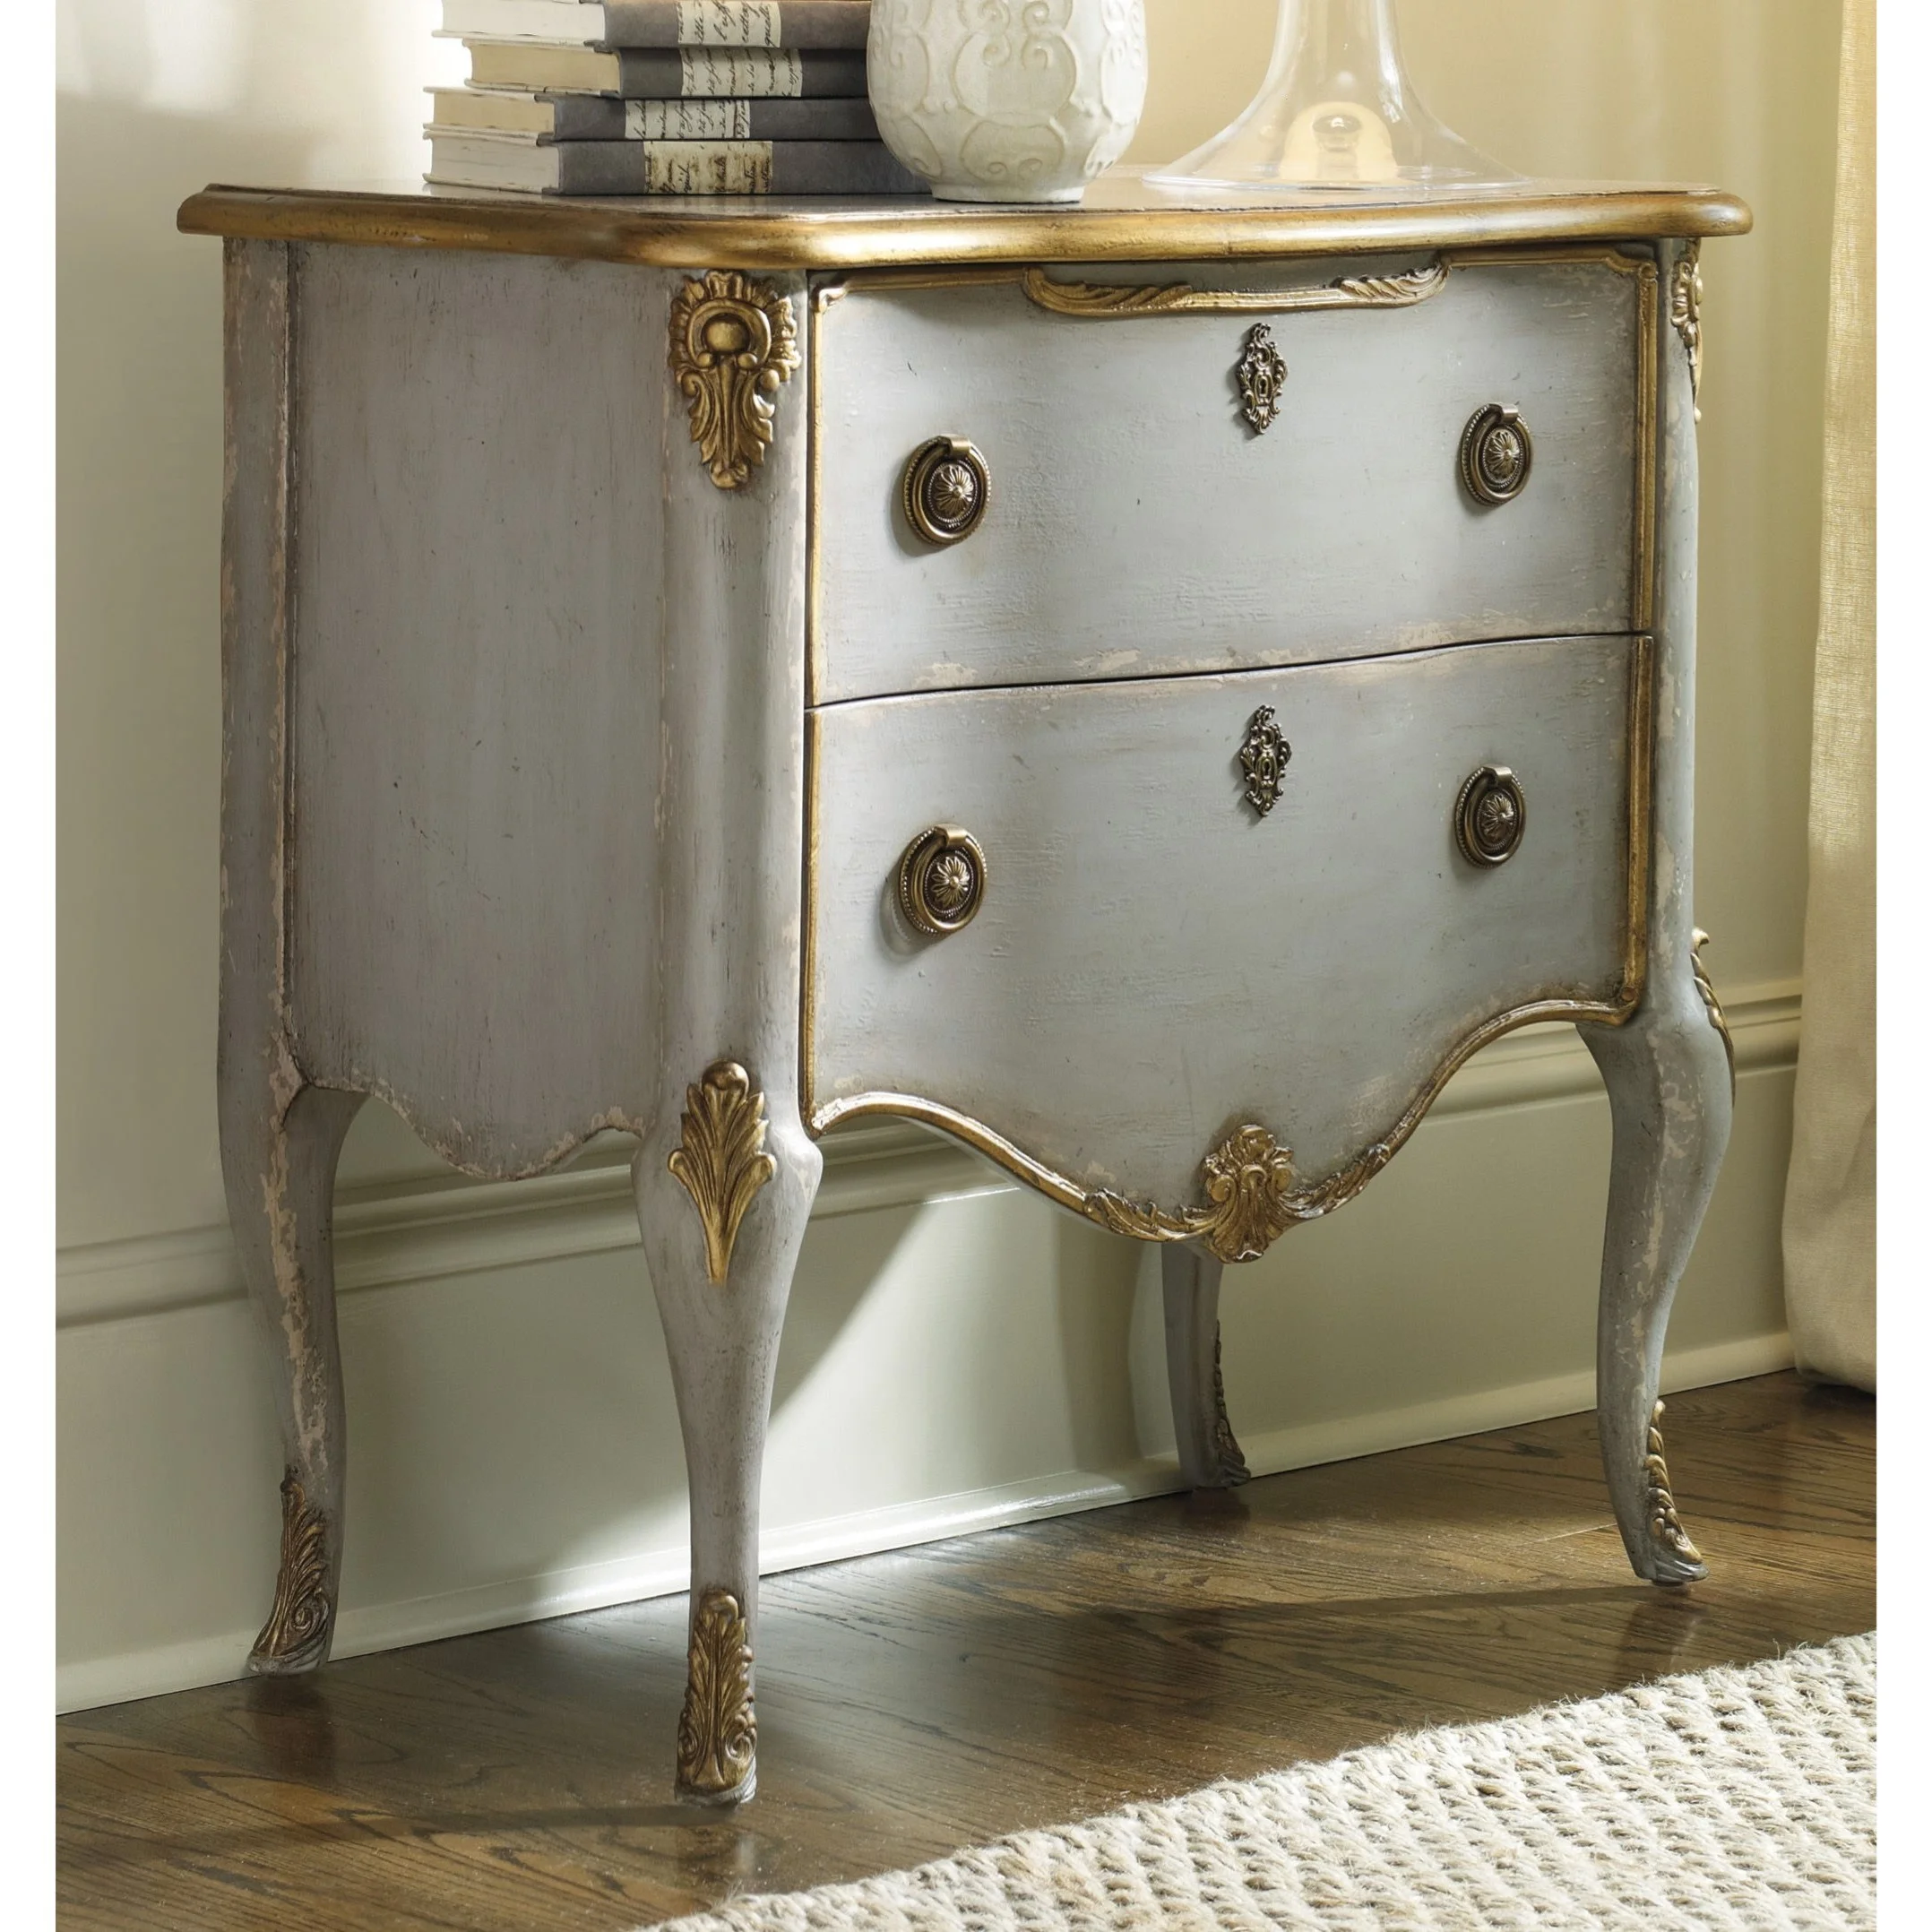 Know Your French Antique Furniture ~ Part 2